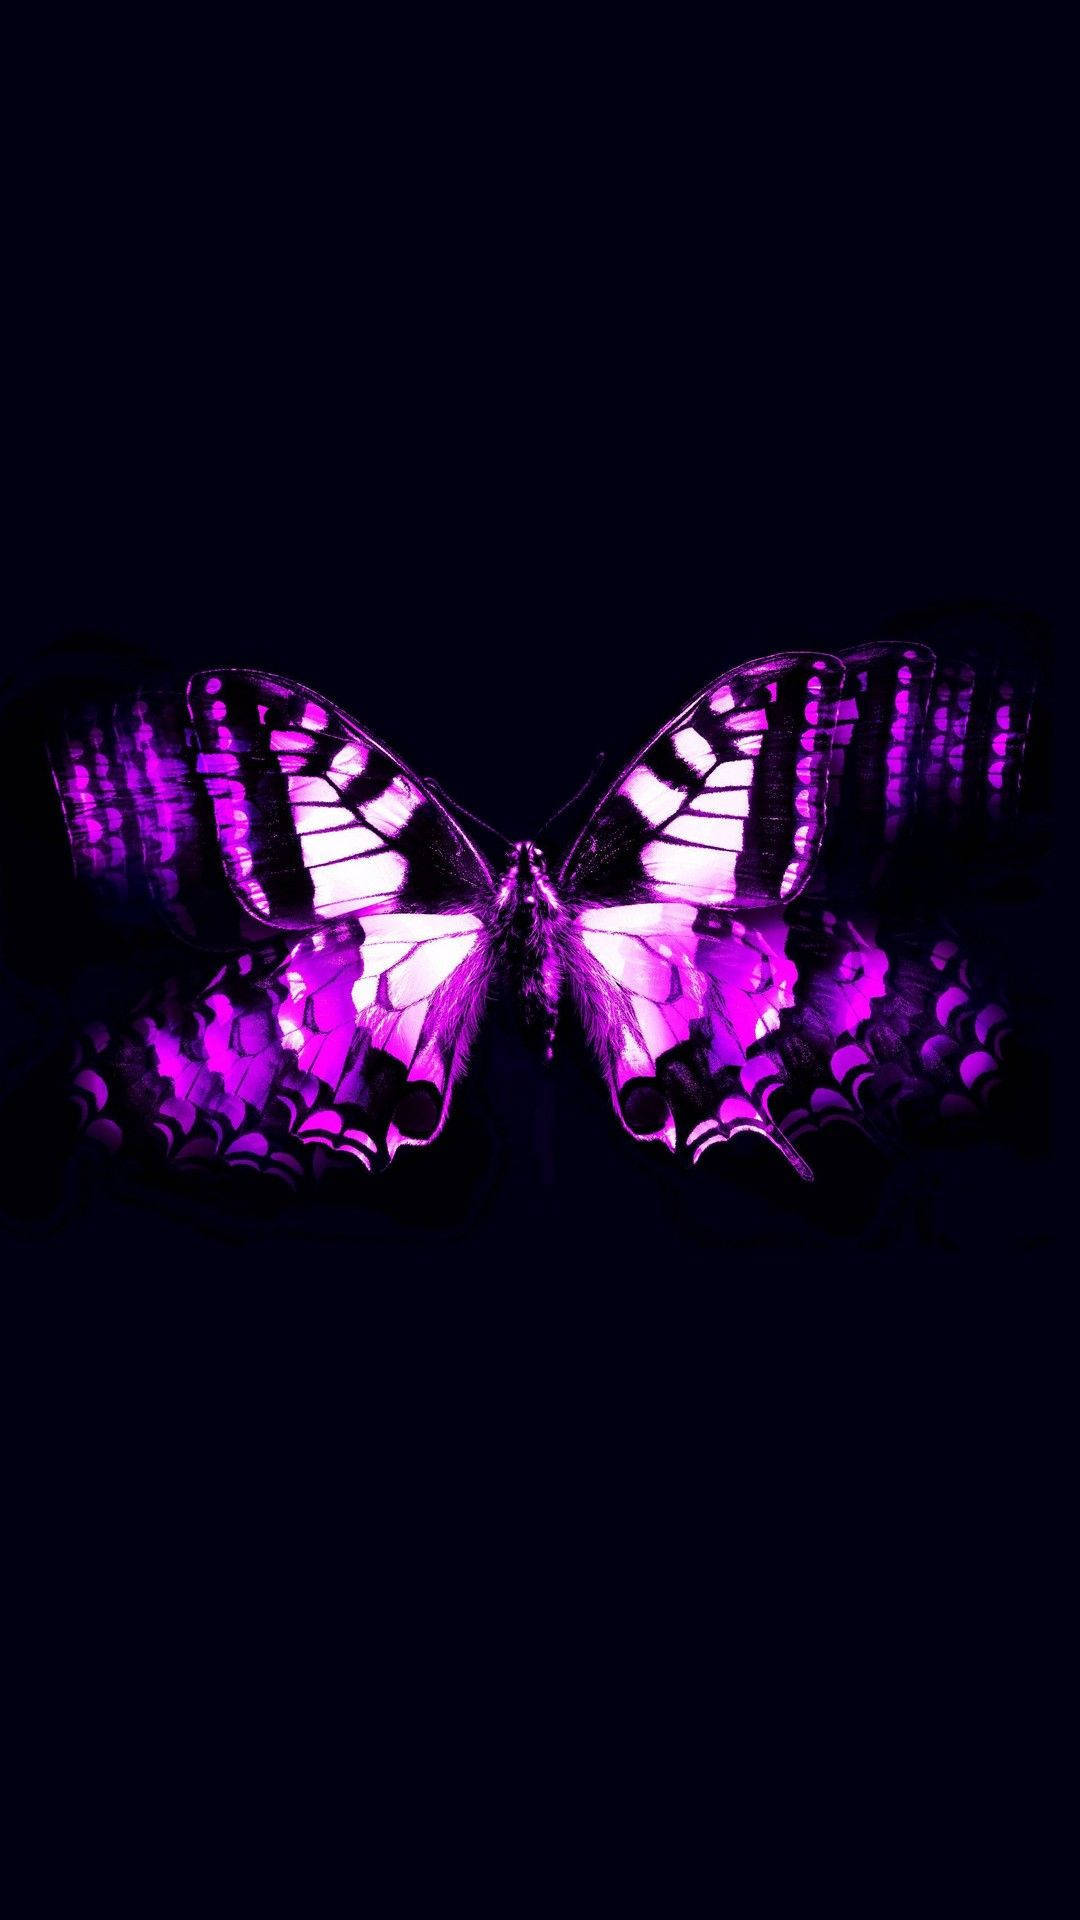 A Purple Butterfly With Black Wings On A Black Background Wallpaper